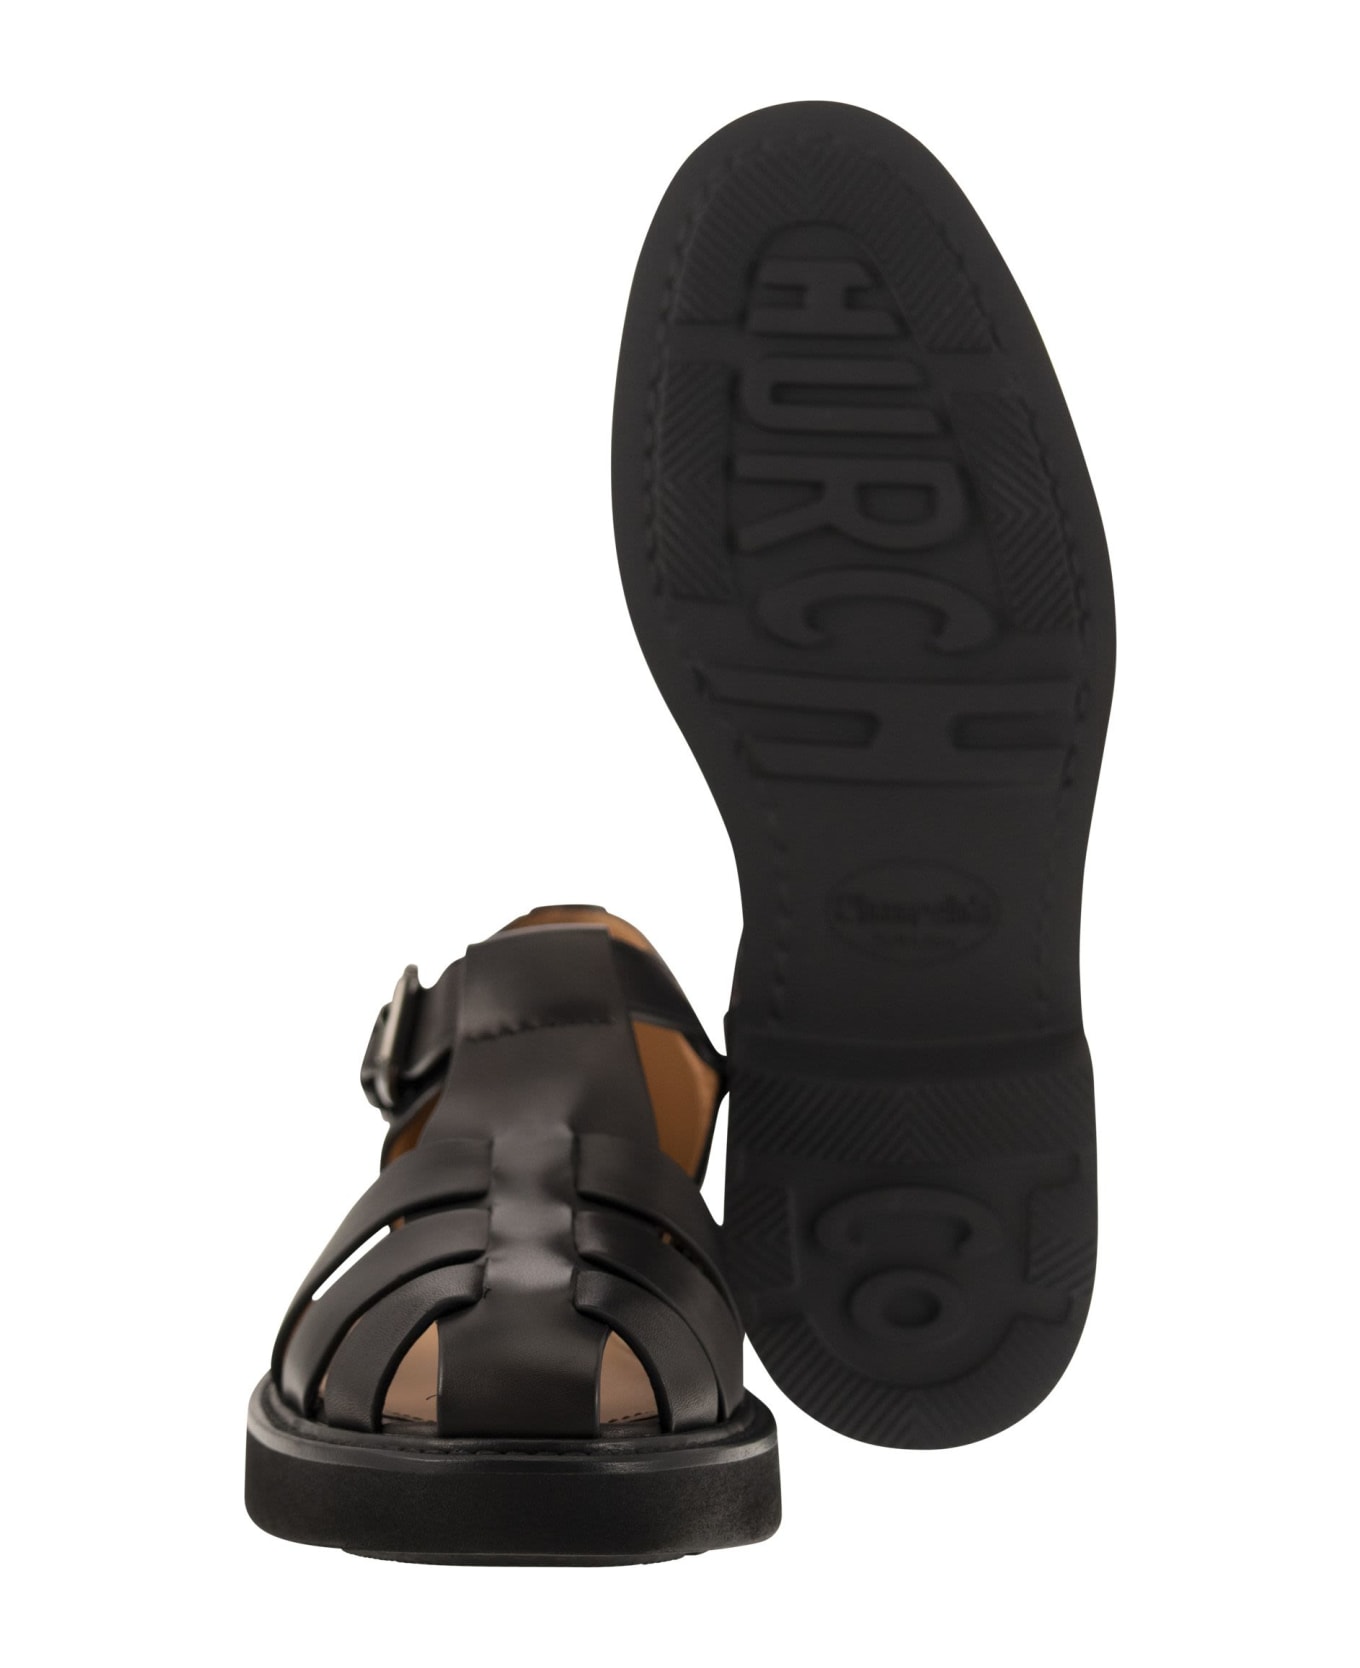 Church's Hove - Leather Sandals - Black